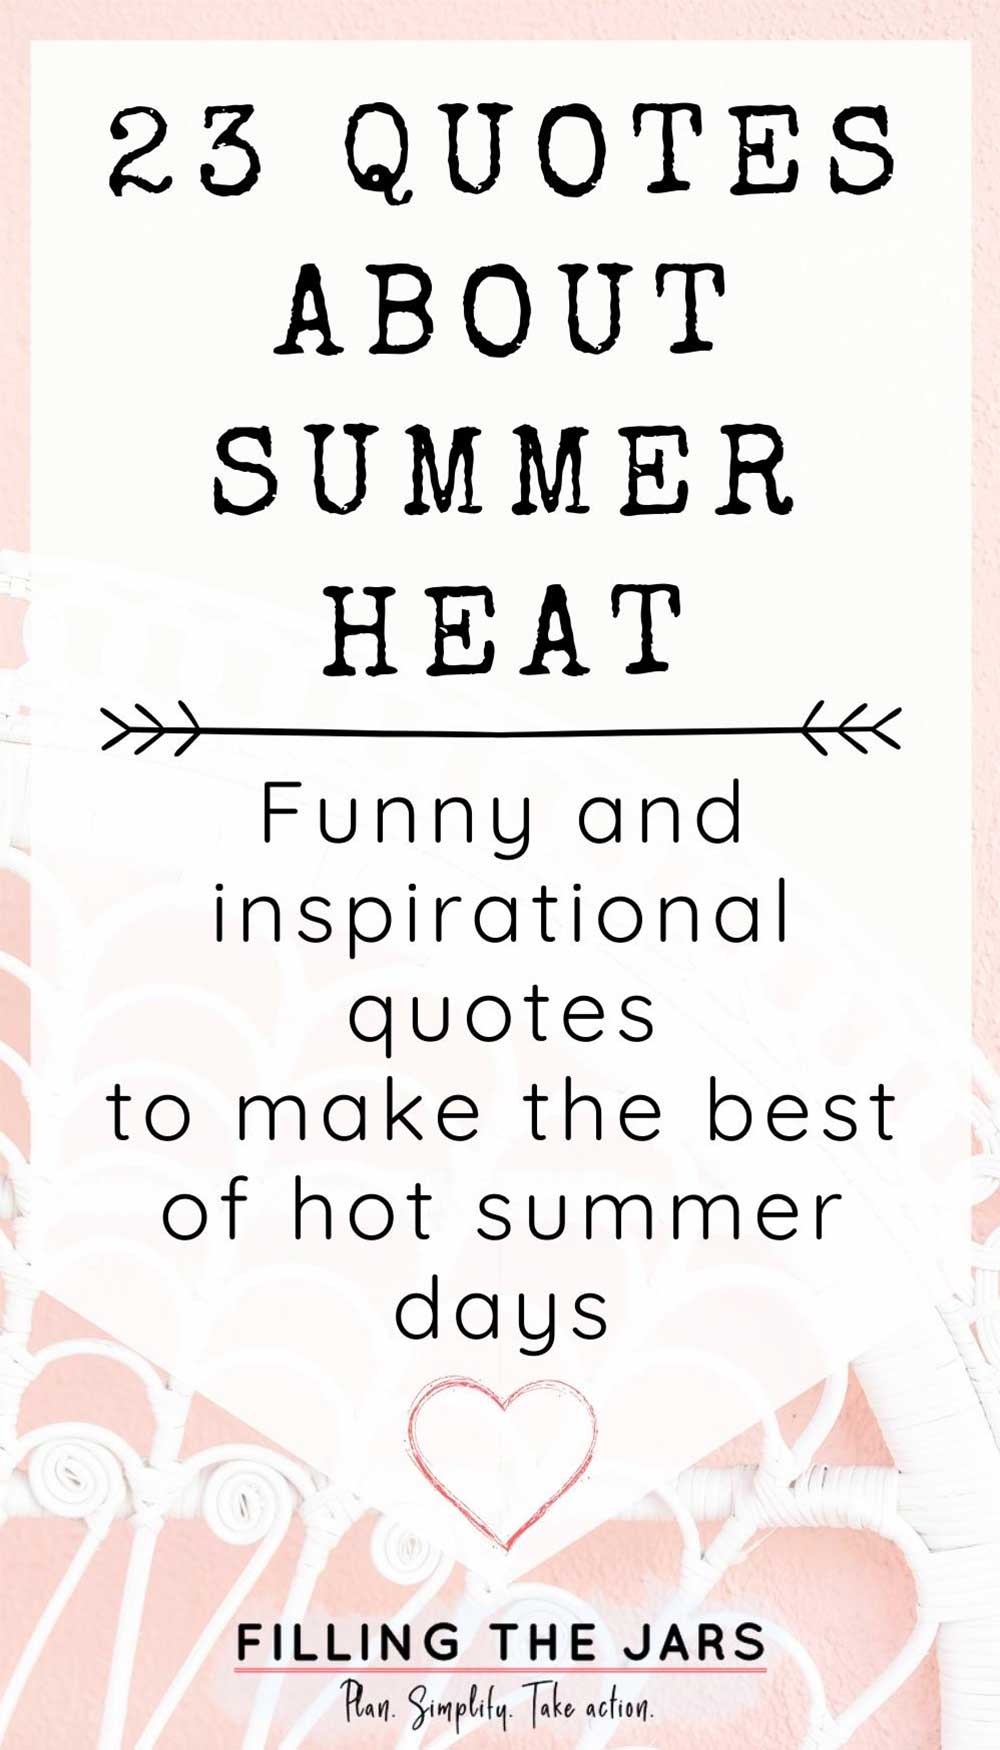 Text 23 quotes about summer heat on white background over image of white wicker chair against pink wall.